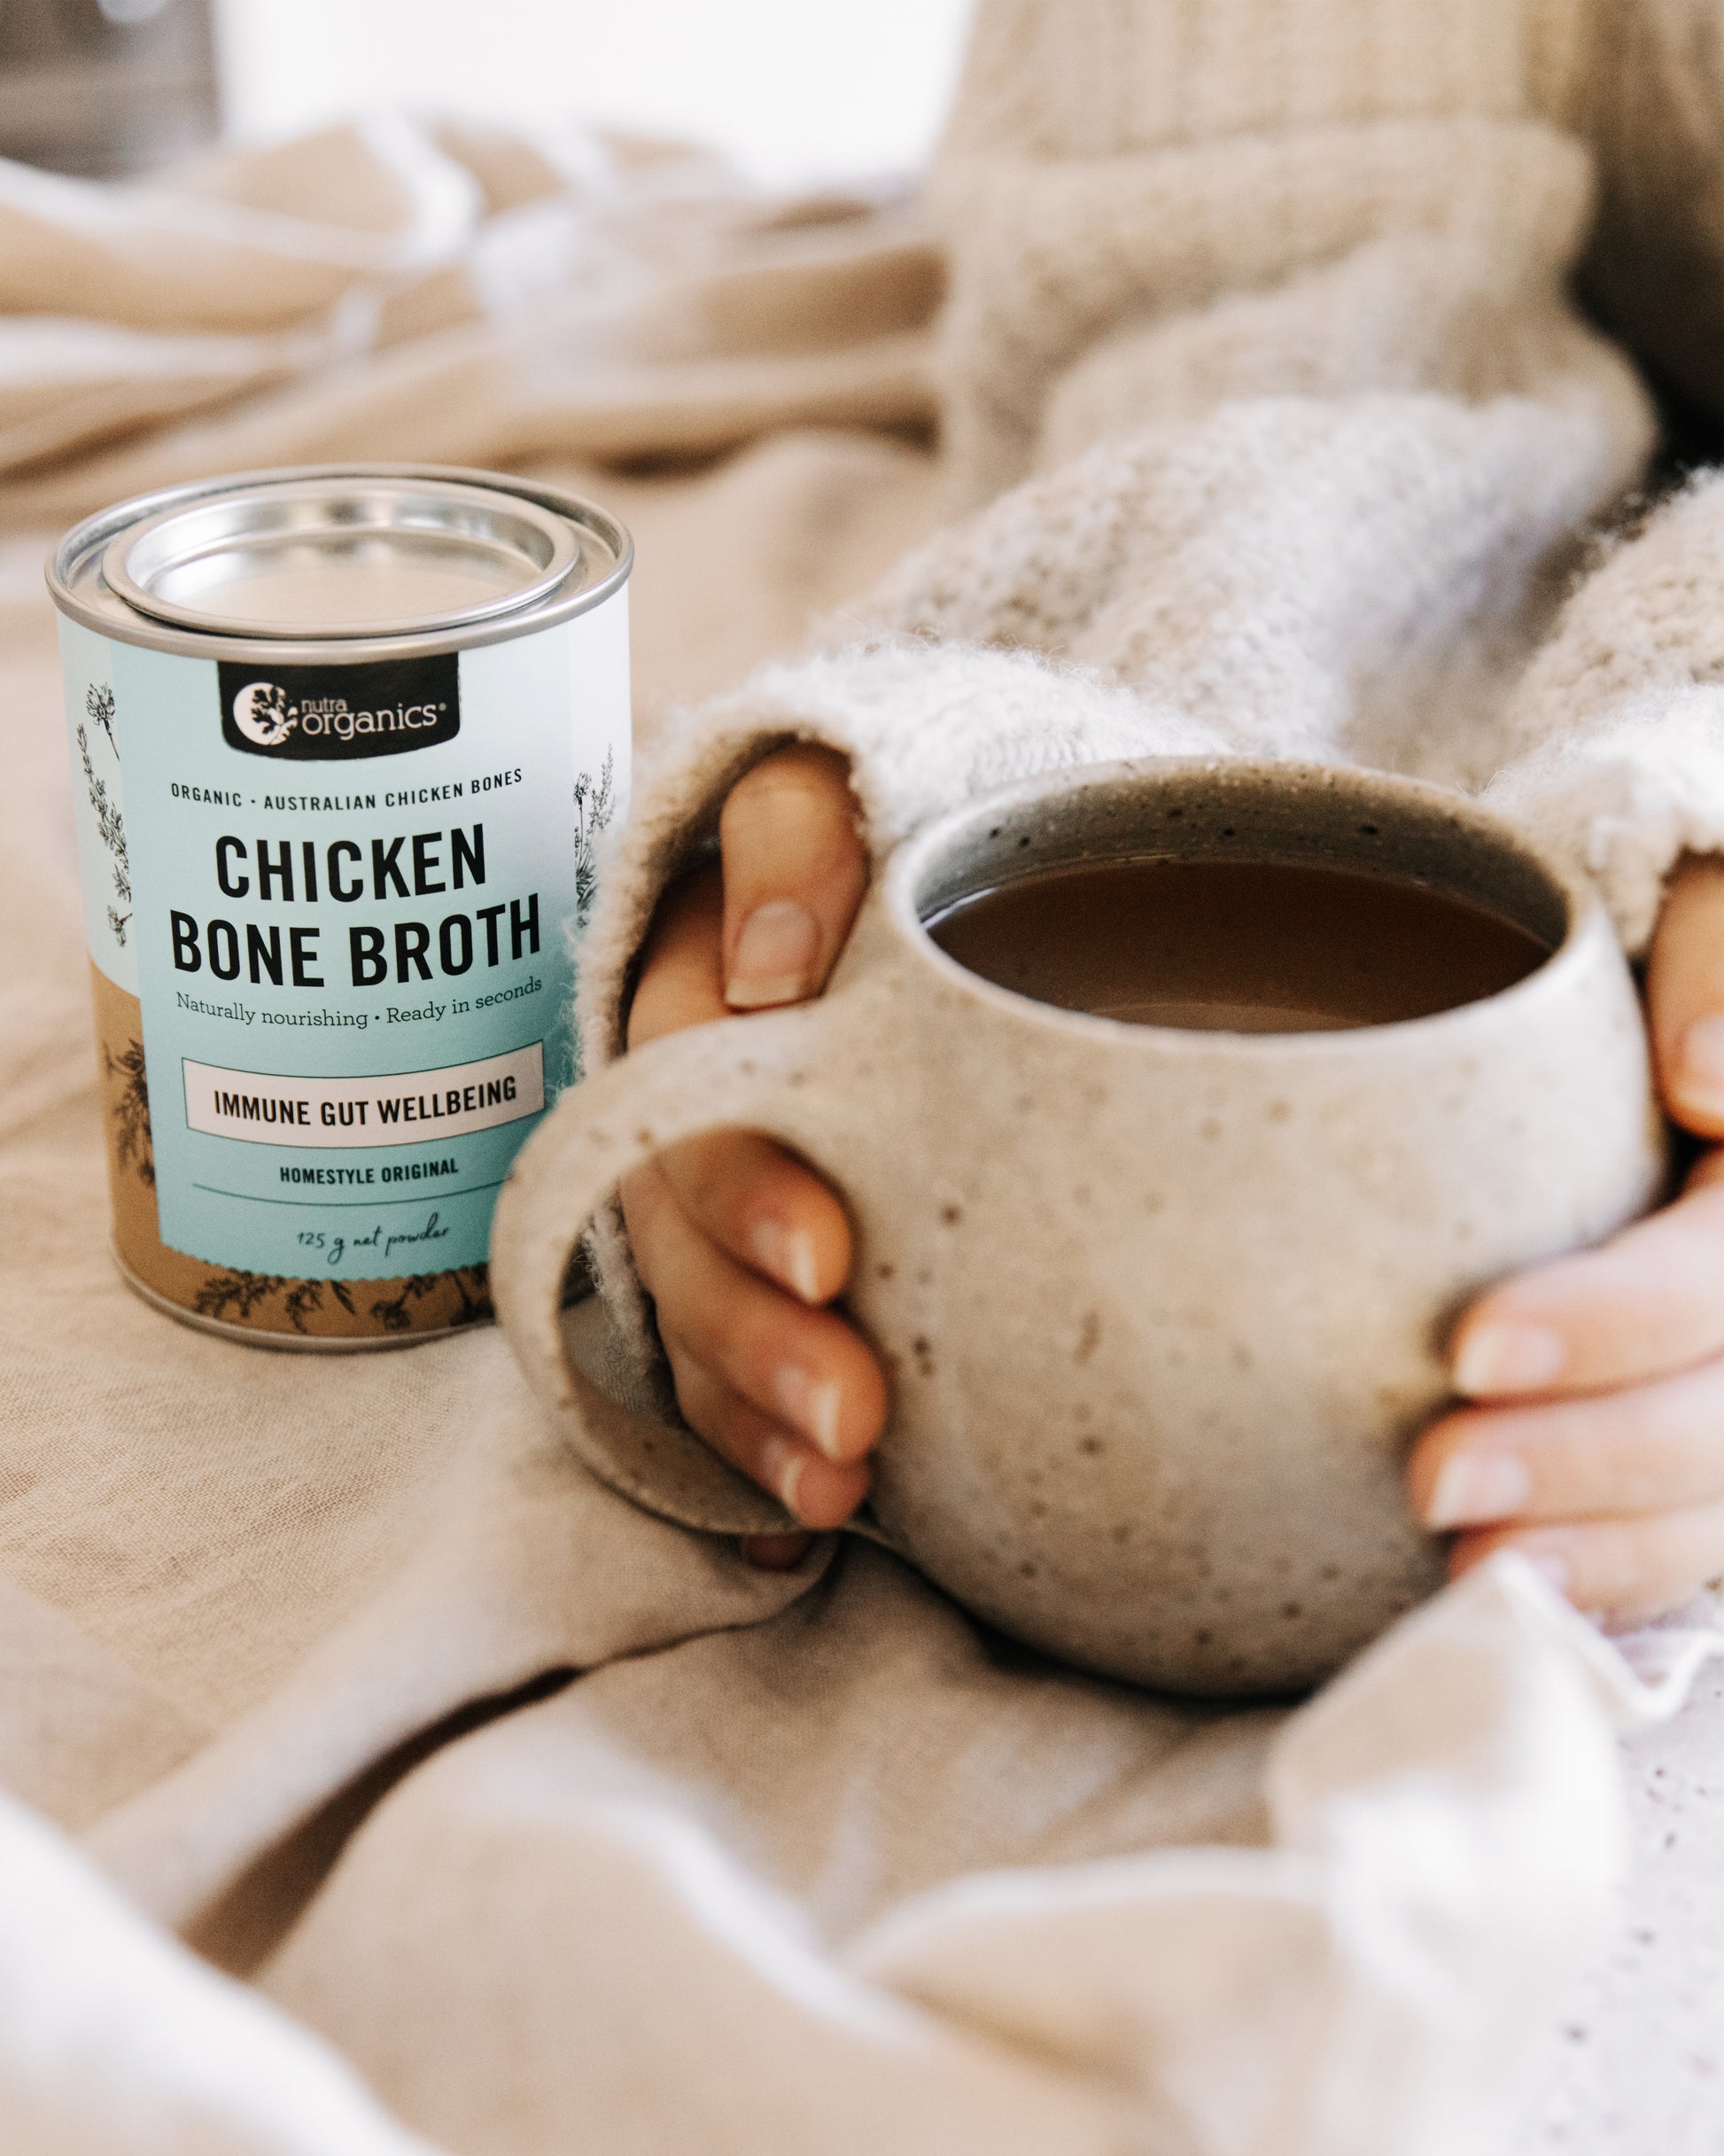 nutra organics homestyle original chicken bone broth canister with a hot cup of broth